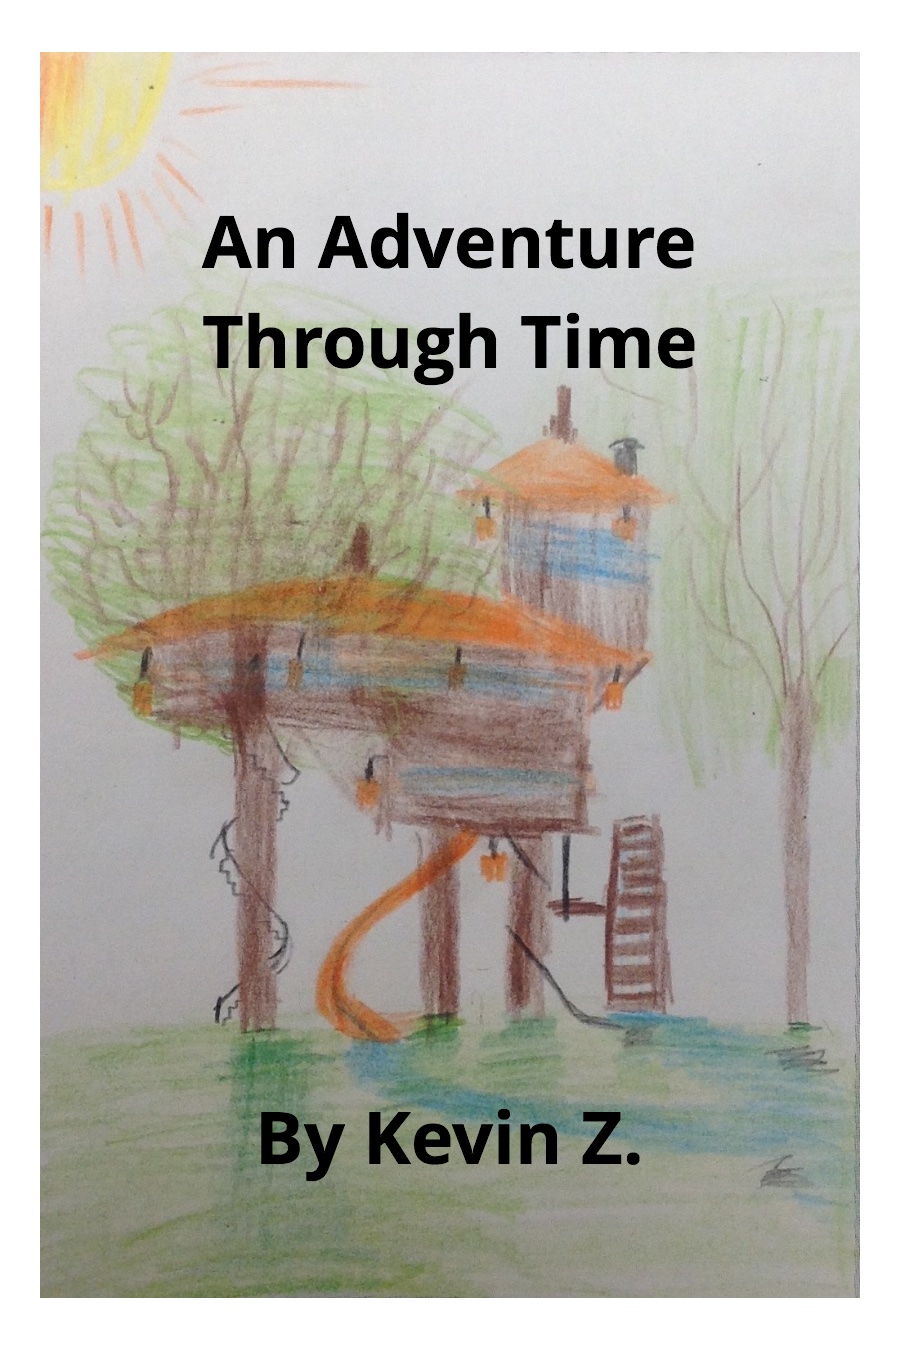 An Adventure Through Time by Kevin Z